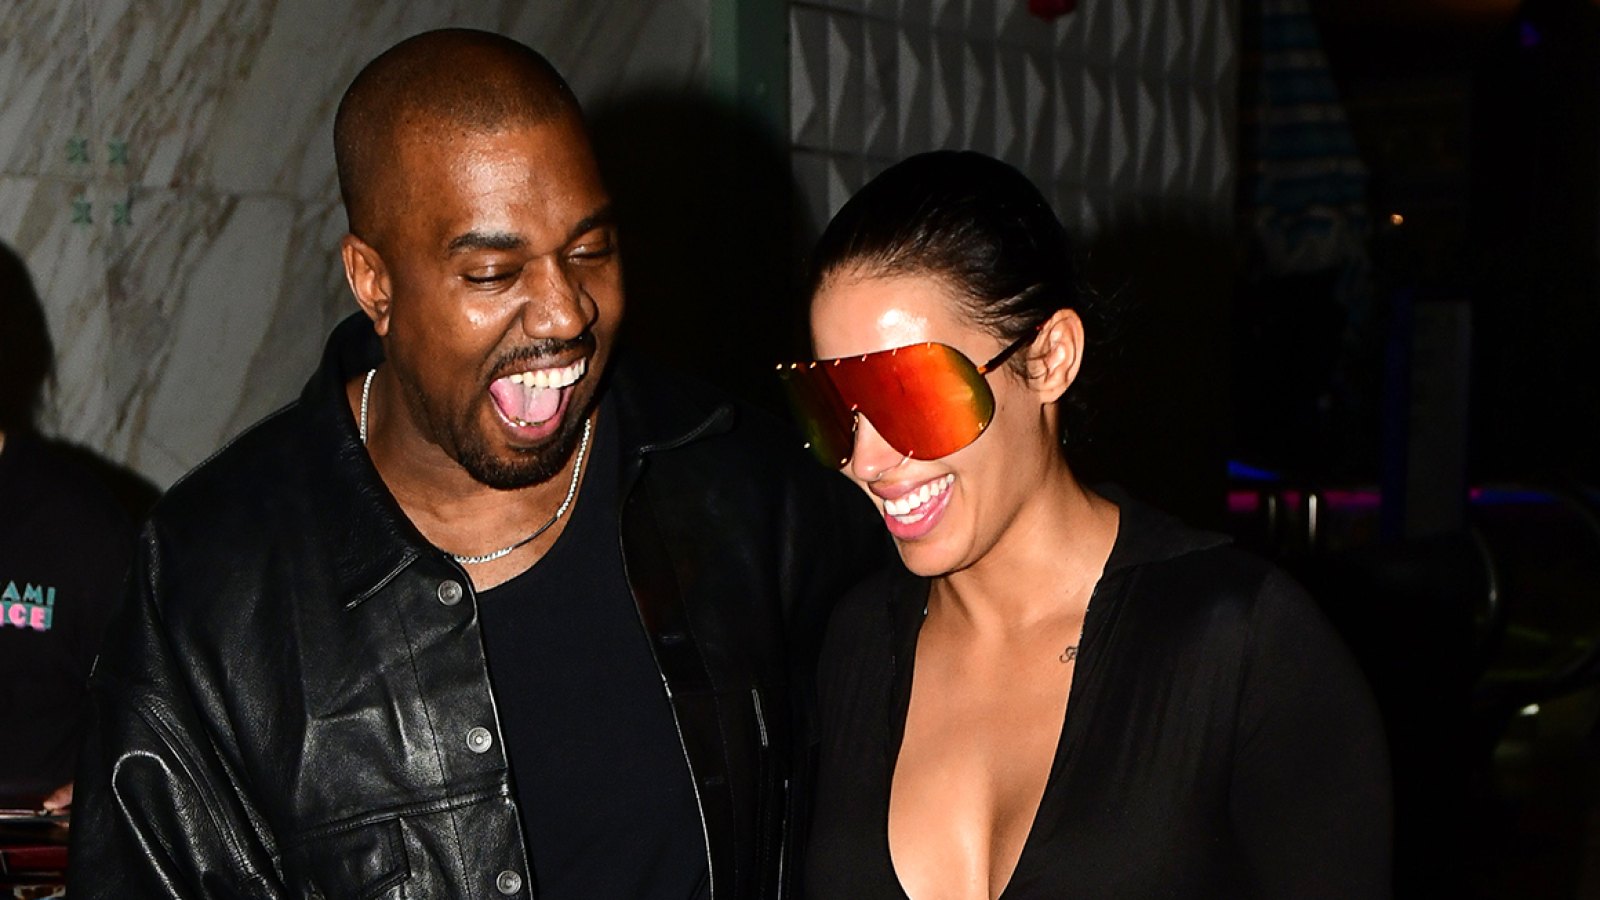 Inside Kanye West's Relationship With 'Muse' Chaney Jones: 'They're Enjoying Spending Time Together'